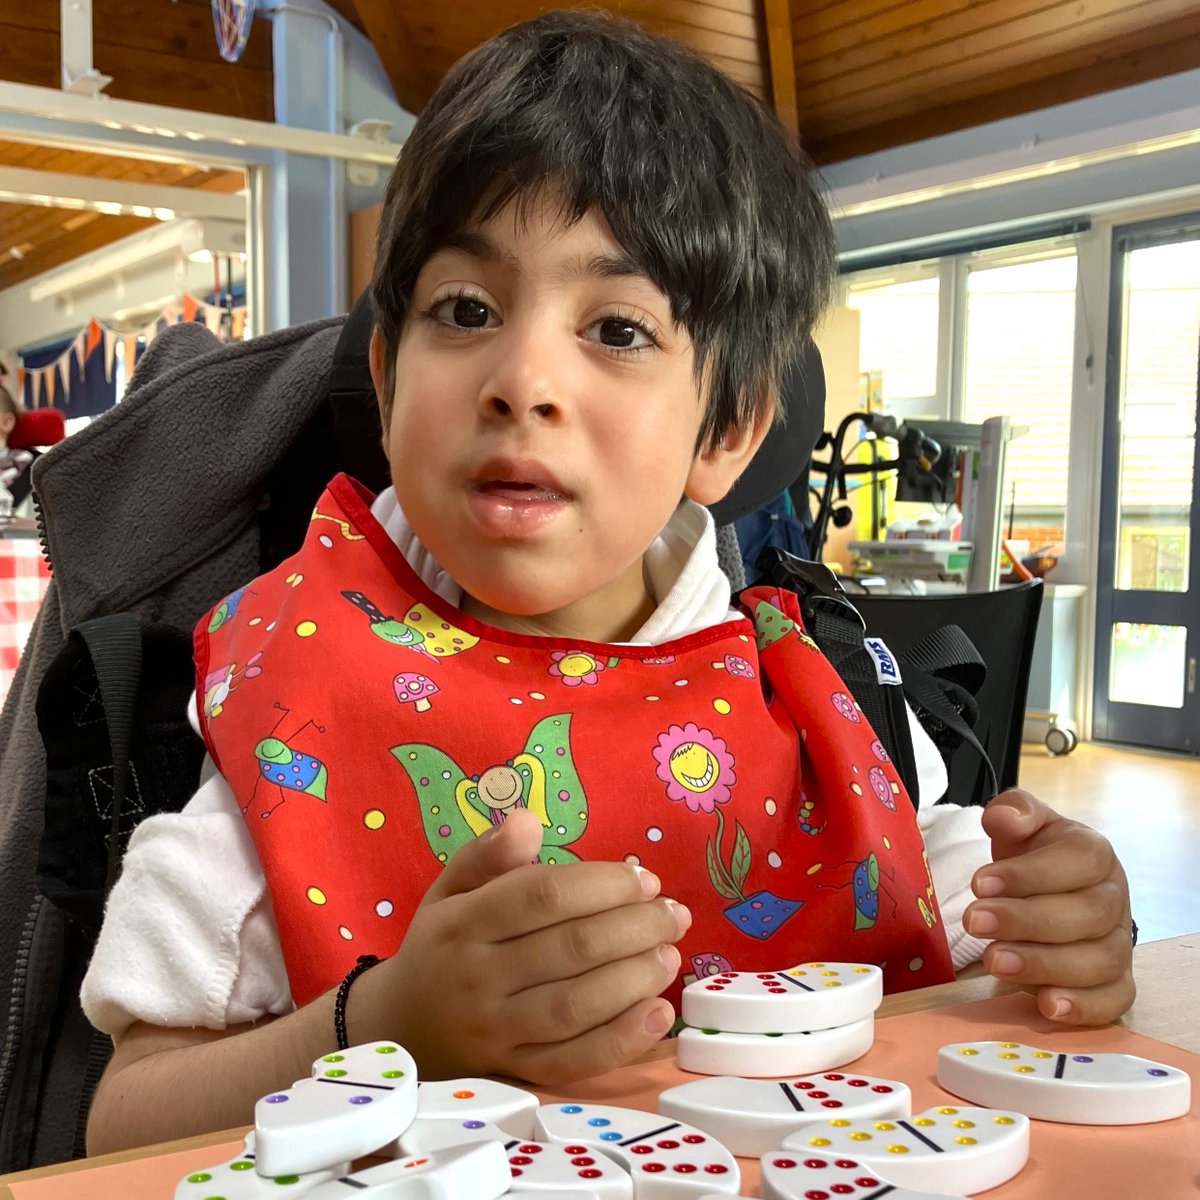 Say hello to Hareem! 🥰 During respite stays her happy place is in the Hope House playroom where she loves to enjoy all sorts of different fun and games with the care staff 😍❤

#HopeHouse #respitecare #playroom #fun #games #care #childrenshospice